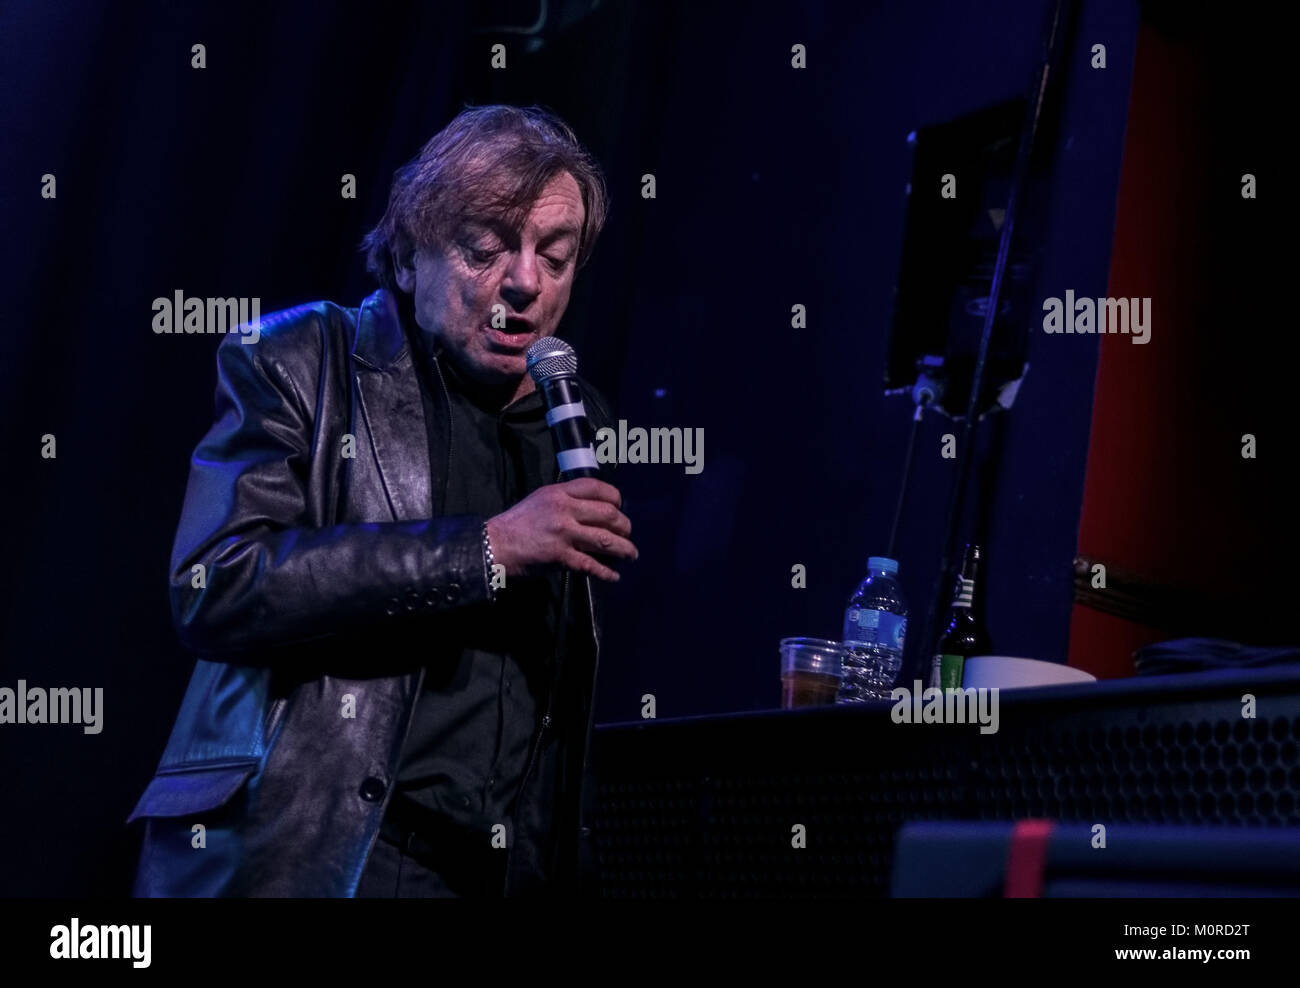 June 17, 2017 - Liverpool, Merseyside, United Kingdom - MARK E SMITH  lead Singer of  UK Indie band, The Fall performing at Liverpool Arts Club Januray 2017 (Credit Image: © Andy Von Pip via ZUMA Wire) Stock Photo